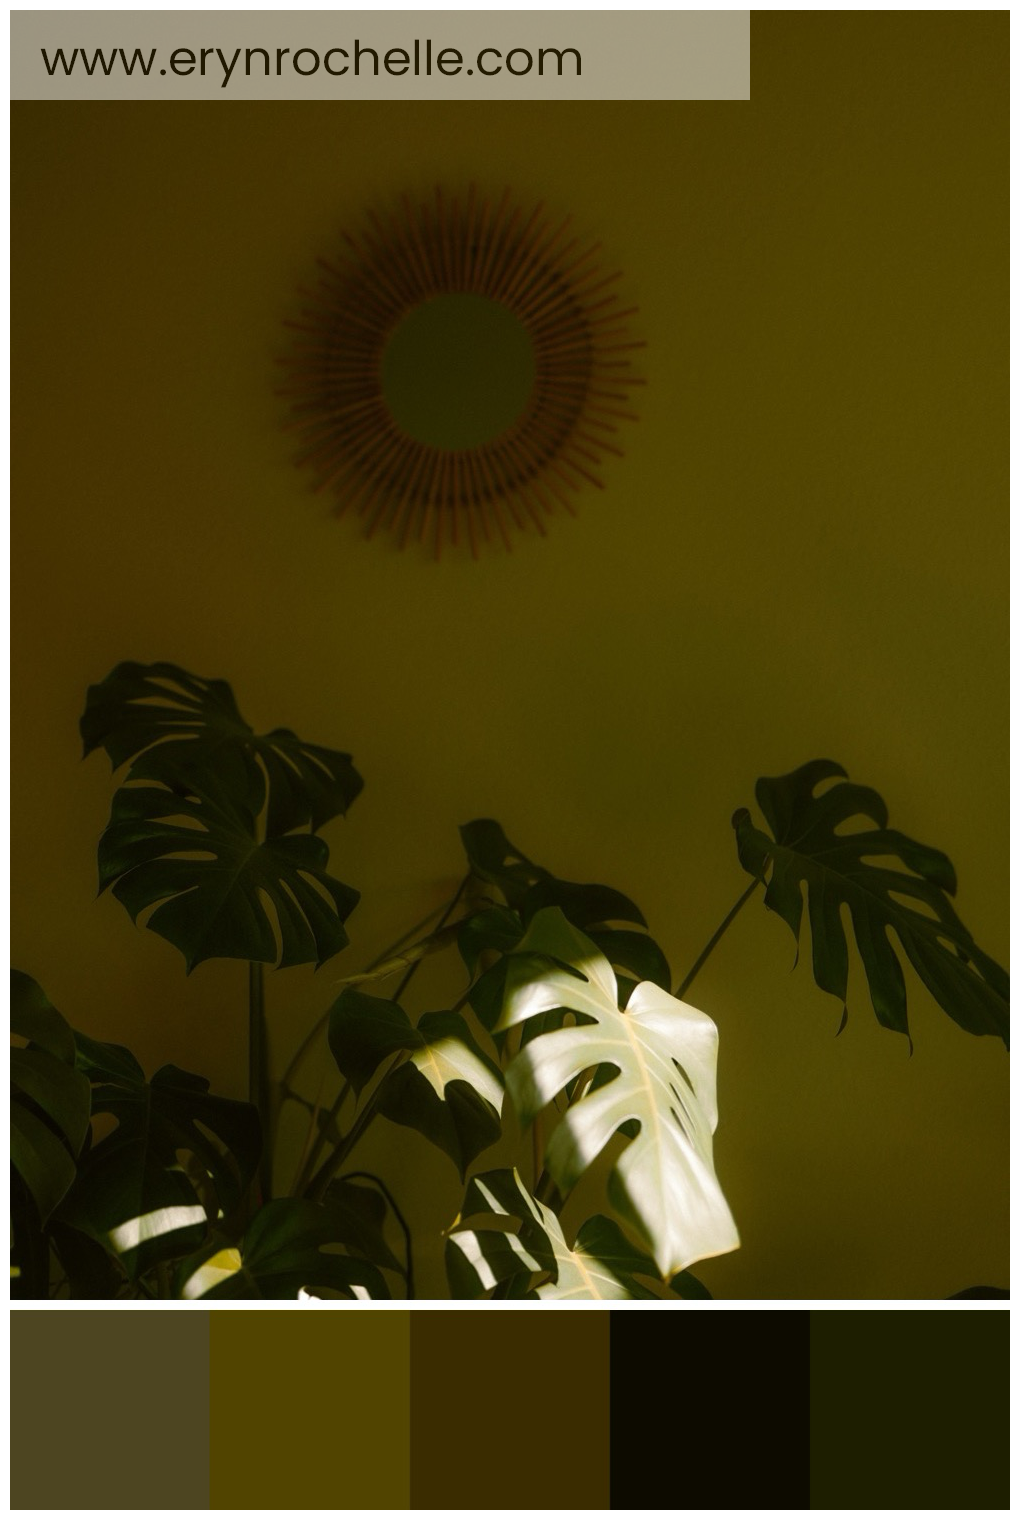 Sunlit Monstera leaves with a sunburst mirror on a wall in the background.